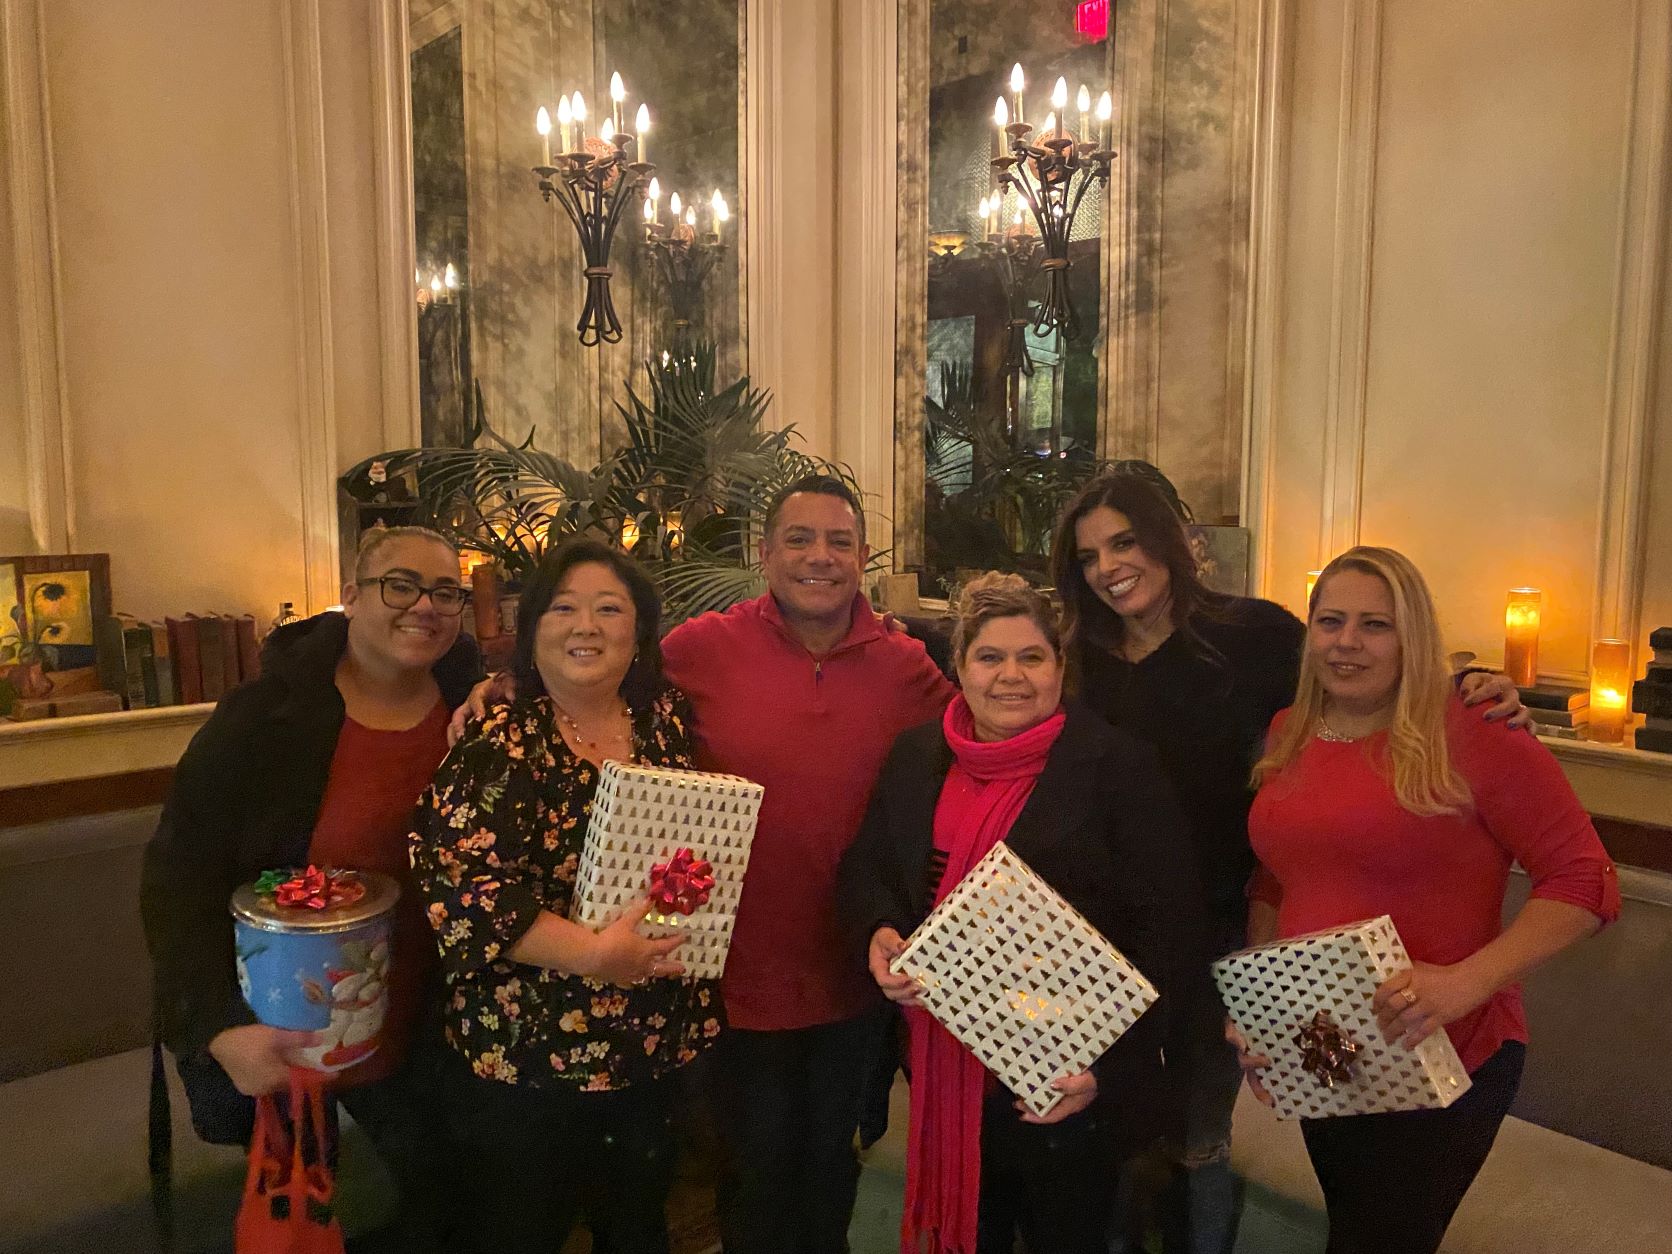 One of our favorite times of the year is celebrating our Caregivers during the Holidays. So appreciative of all their efforts.  Rock stars for sure!